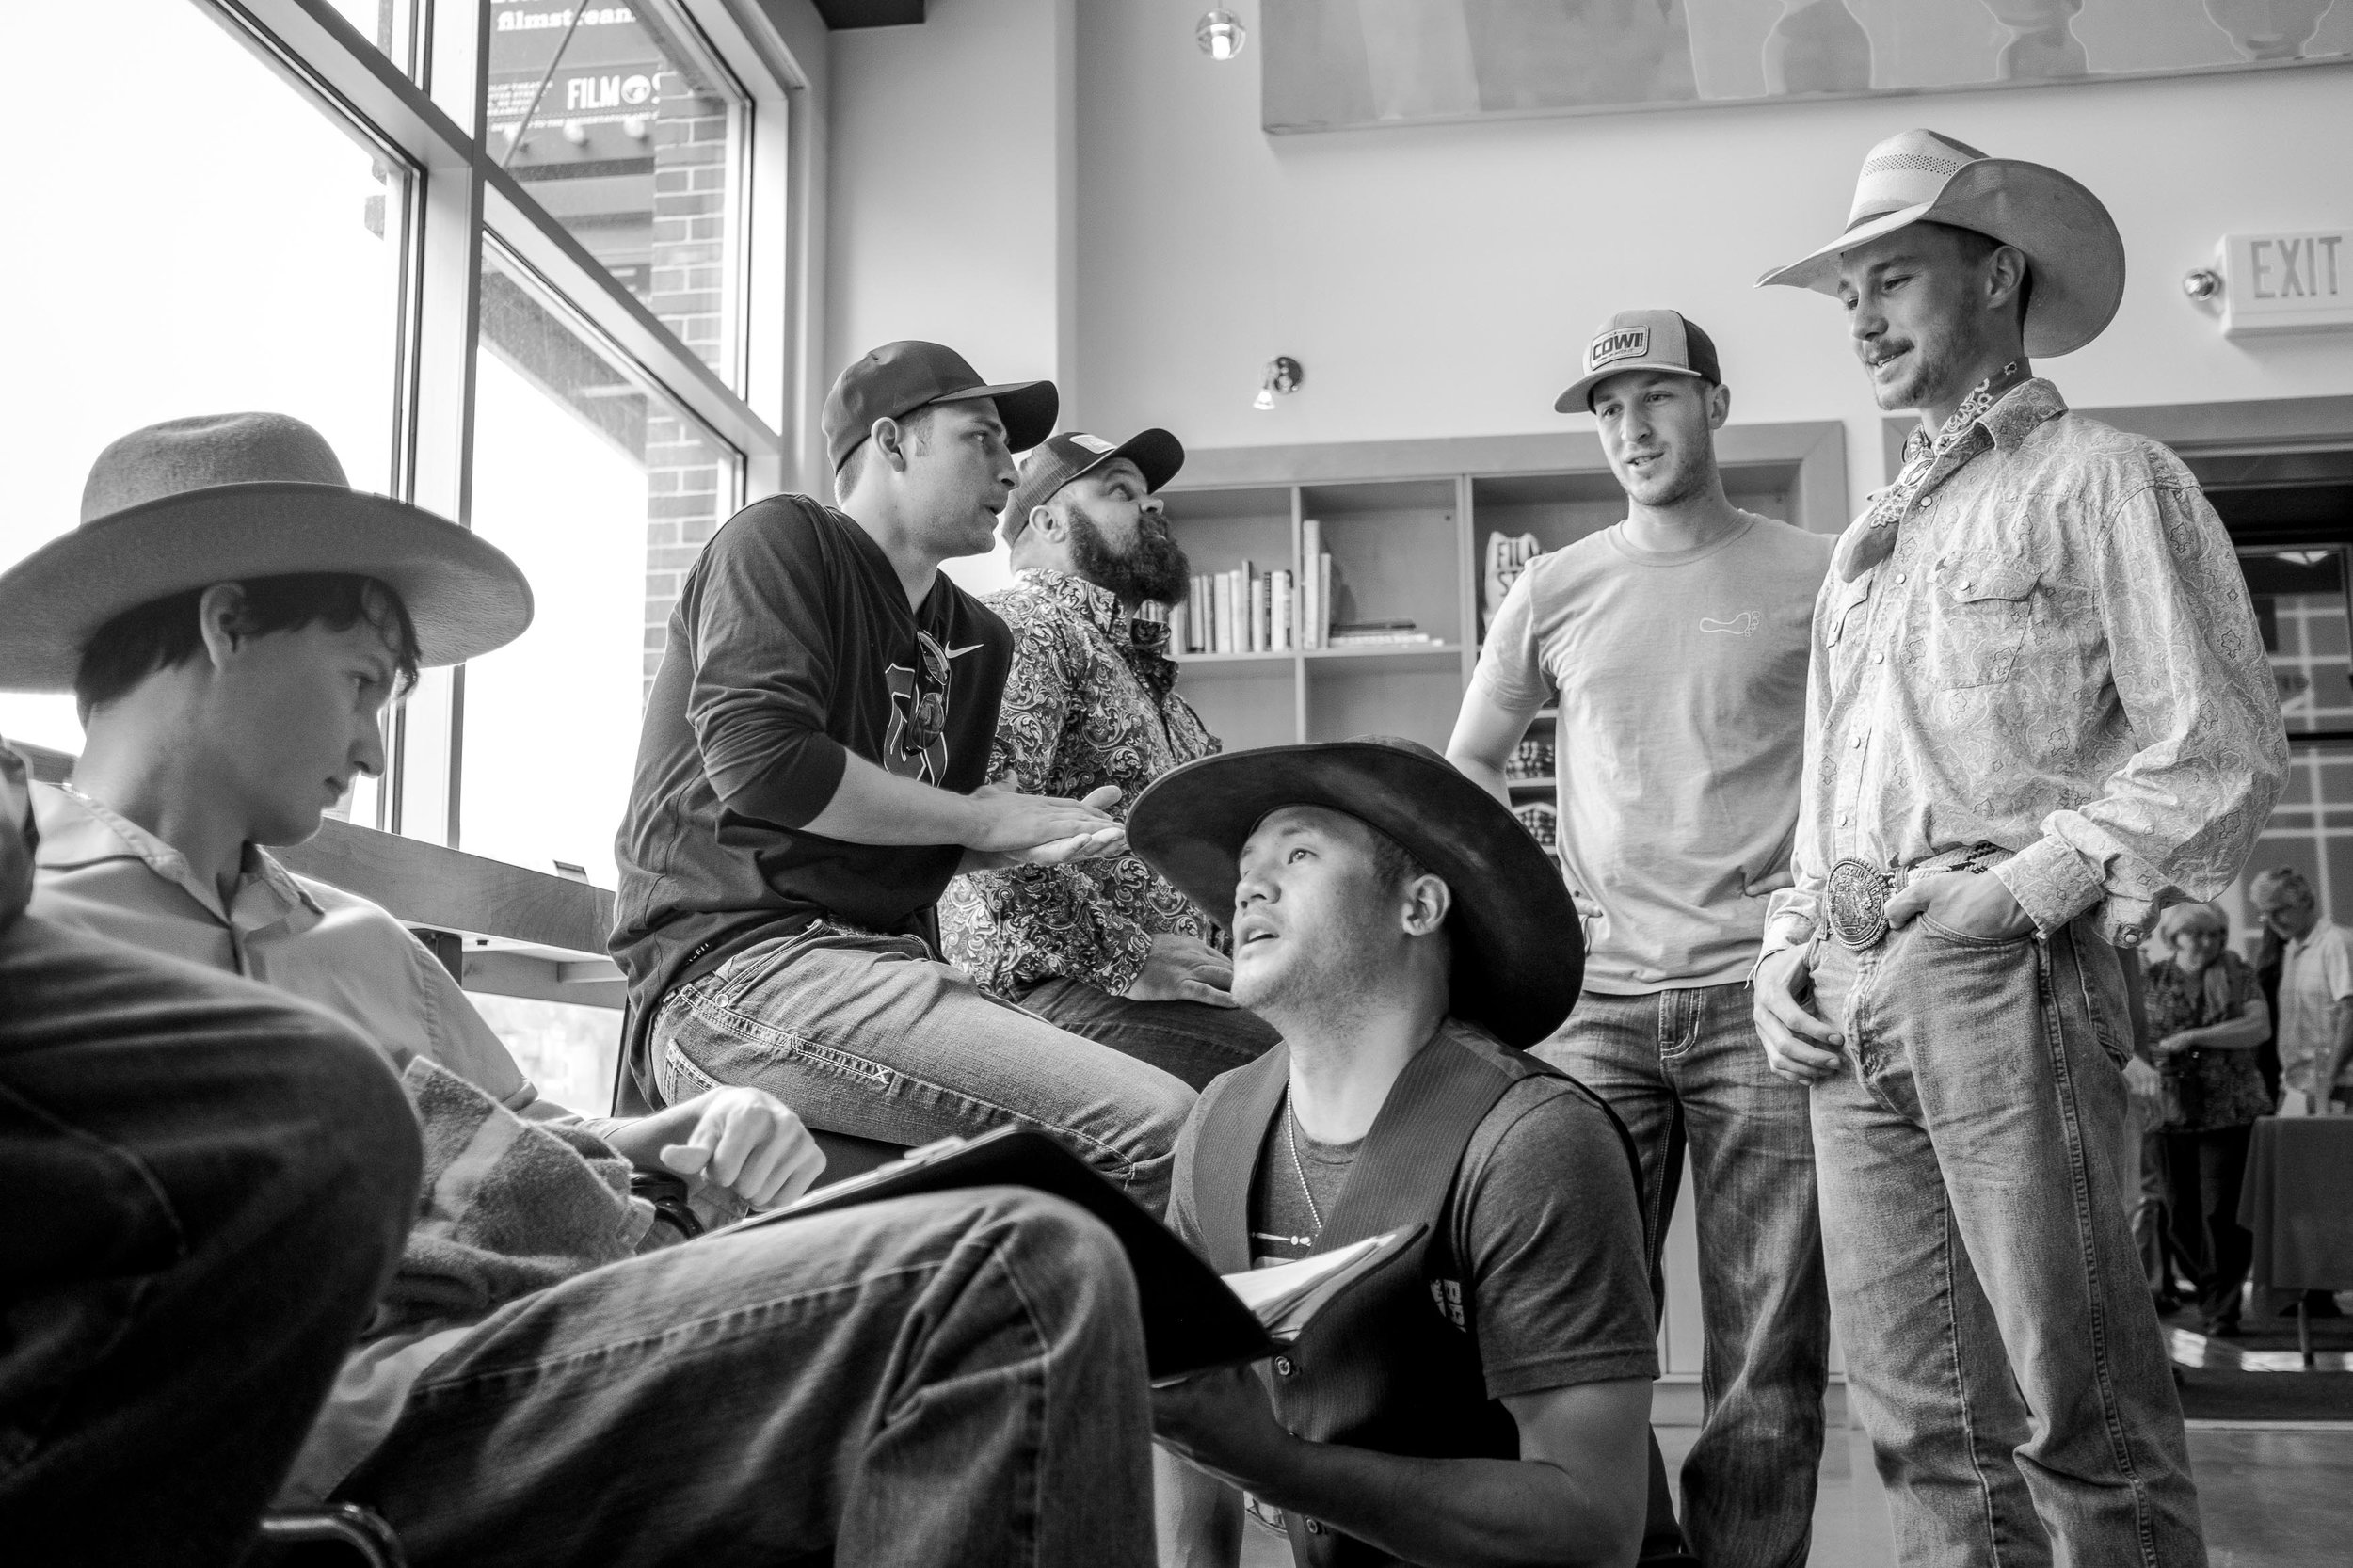  Lane Scott (far left) and Brady Jandreau (far right) catch up with rodeo friends before the screening of The Rider.  